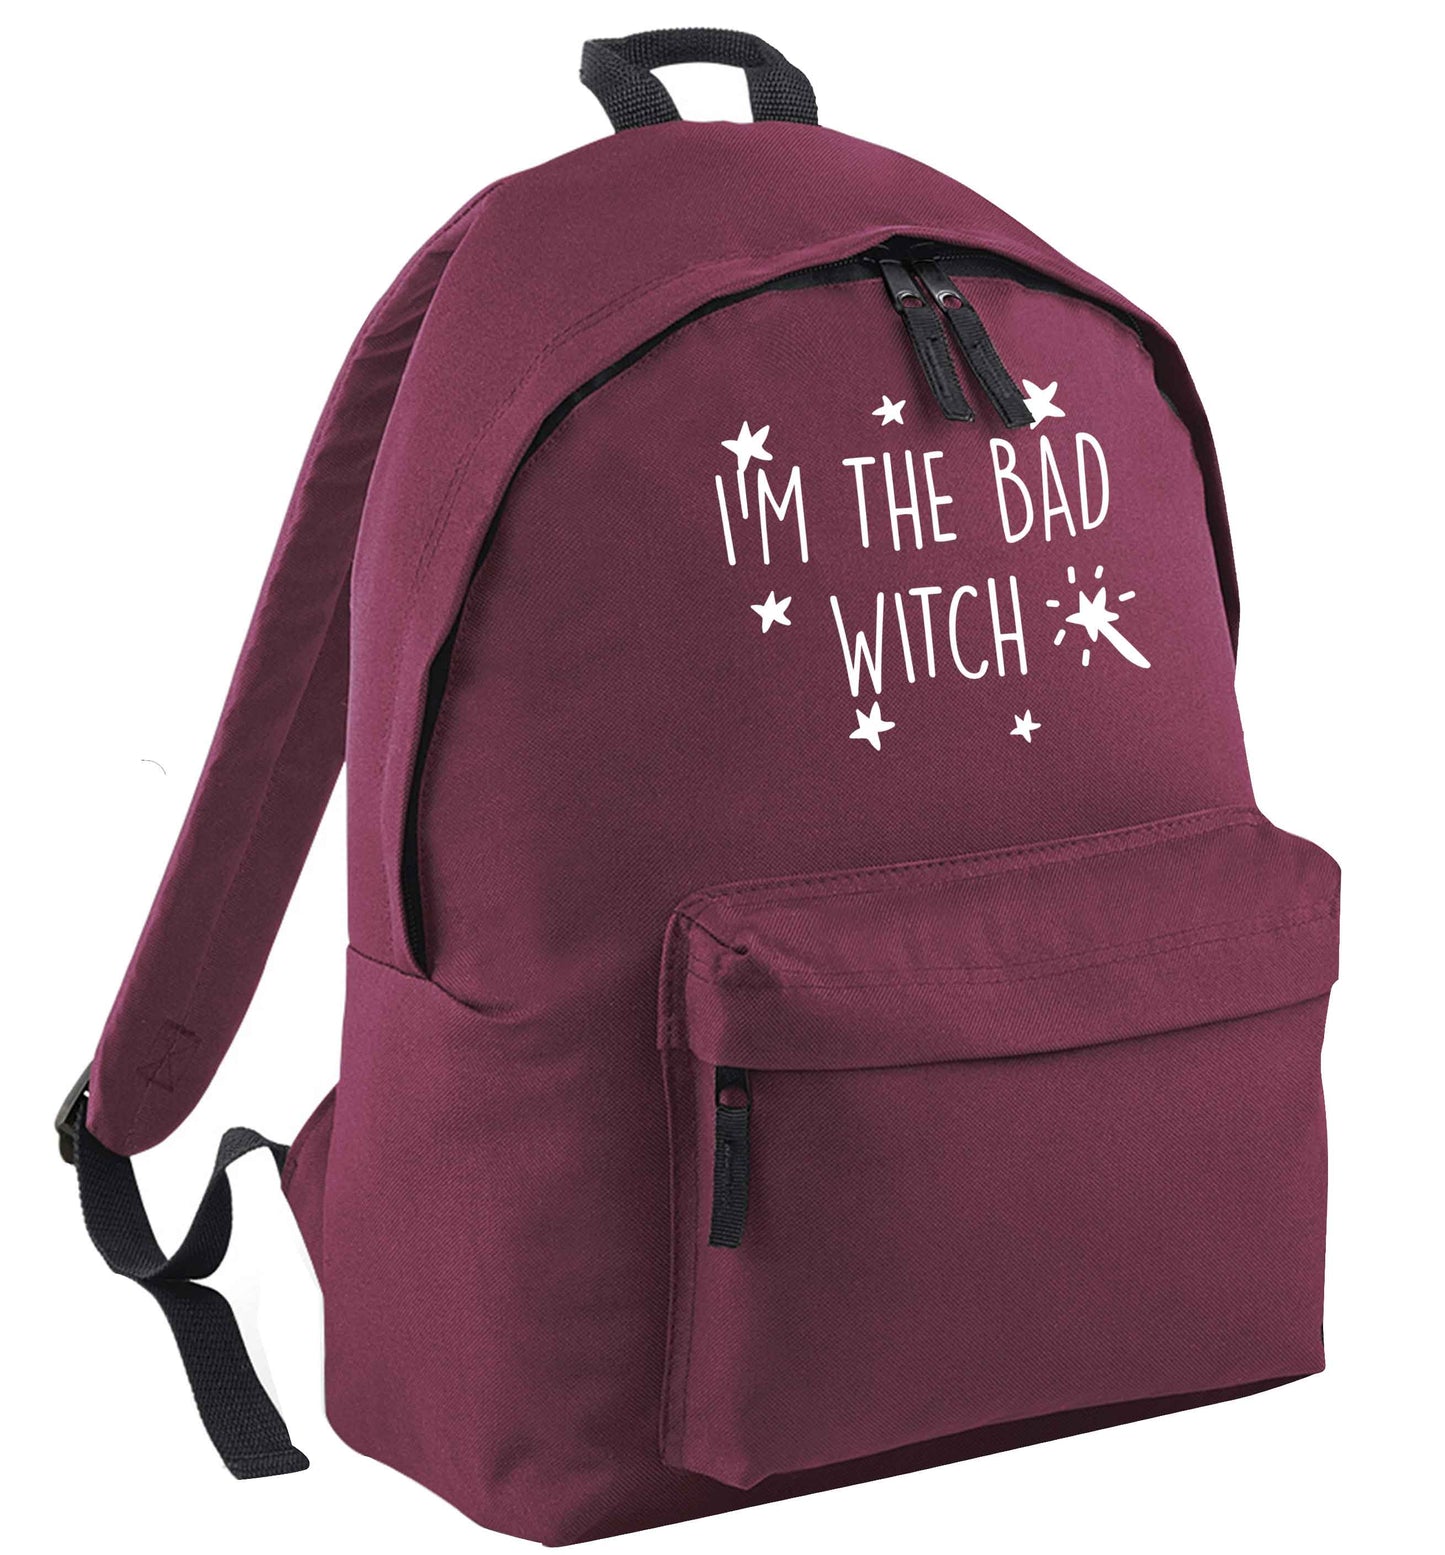 Bad witch maroon adults backpack